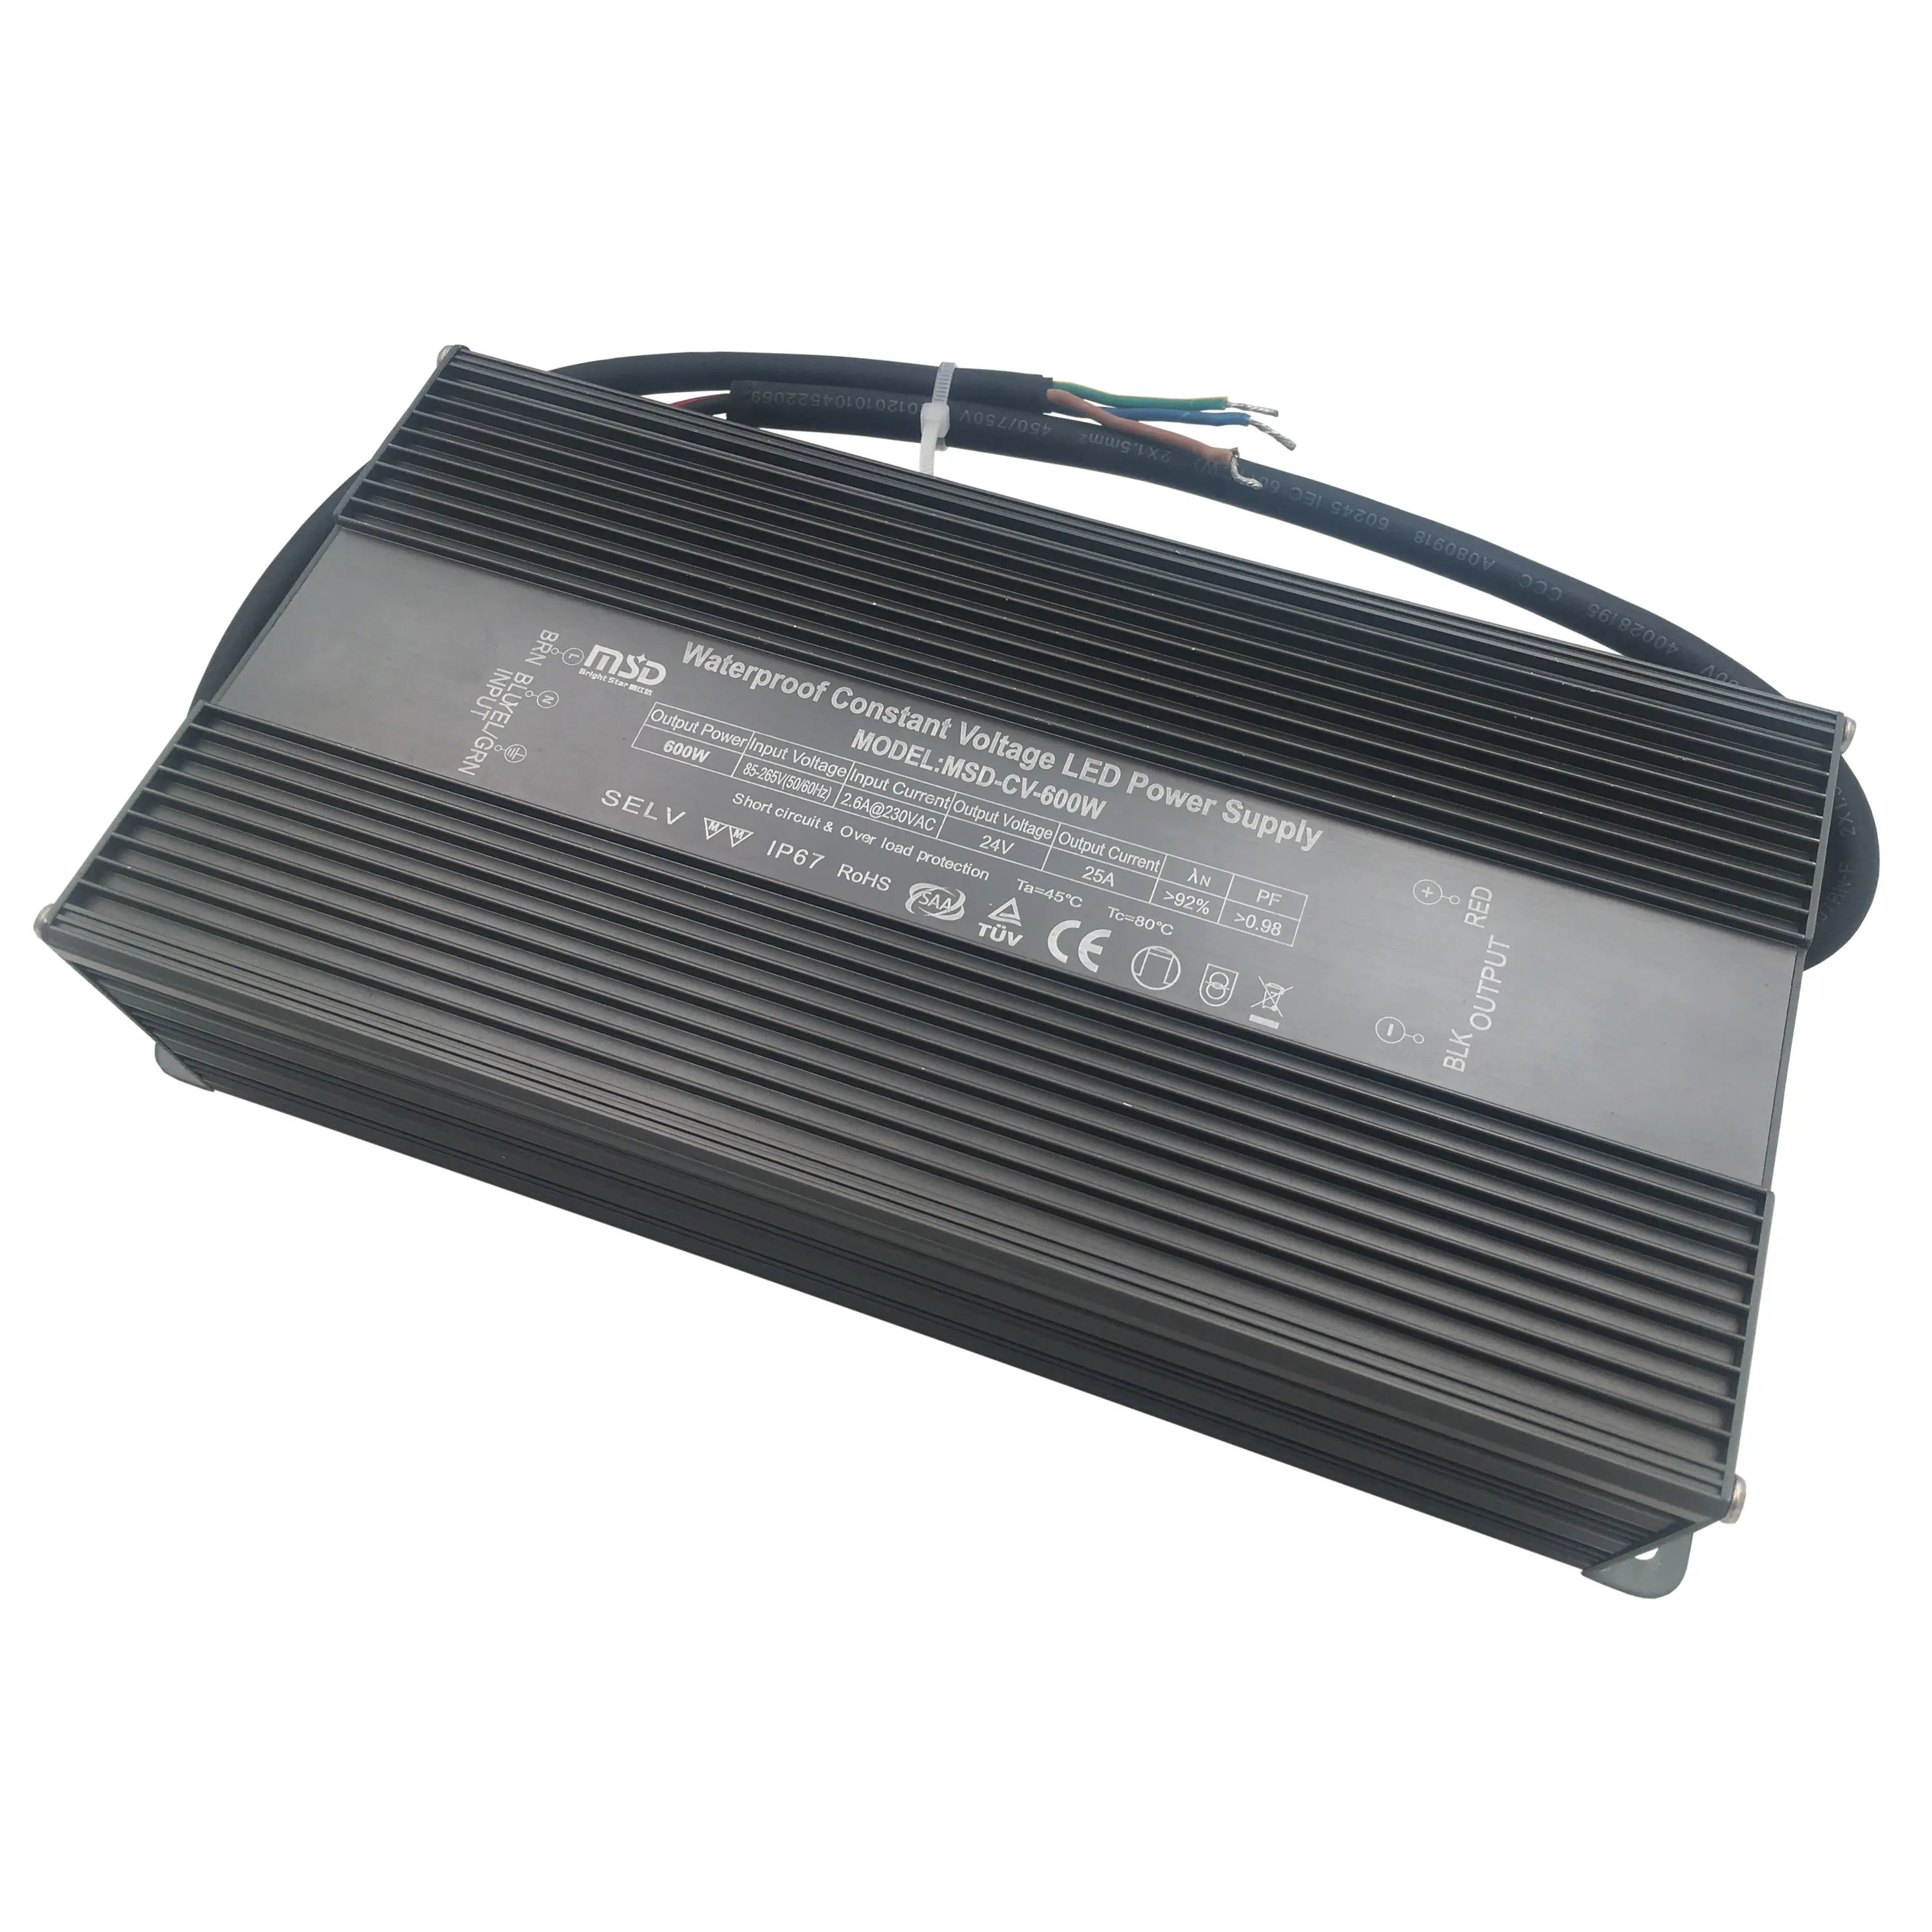 High Pf Constant Voltage Waterproof 600W 750W 800W Led Driver 24V 12v Ip67 Led Power Supply